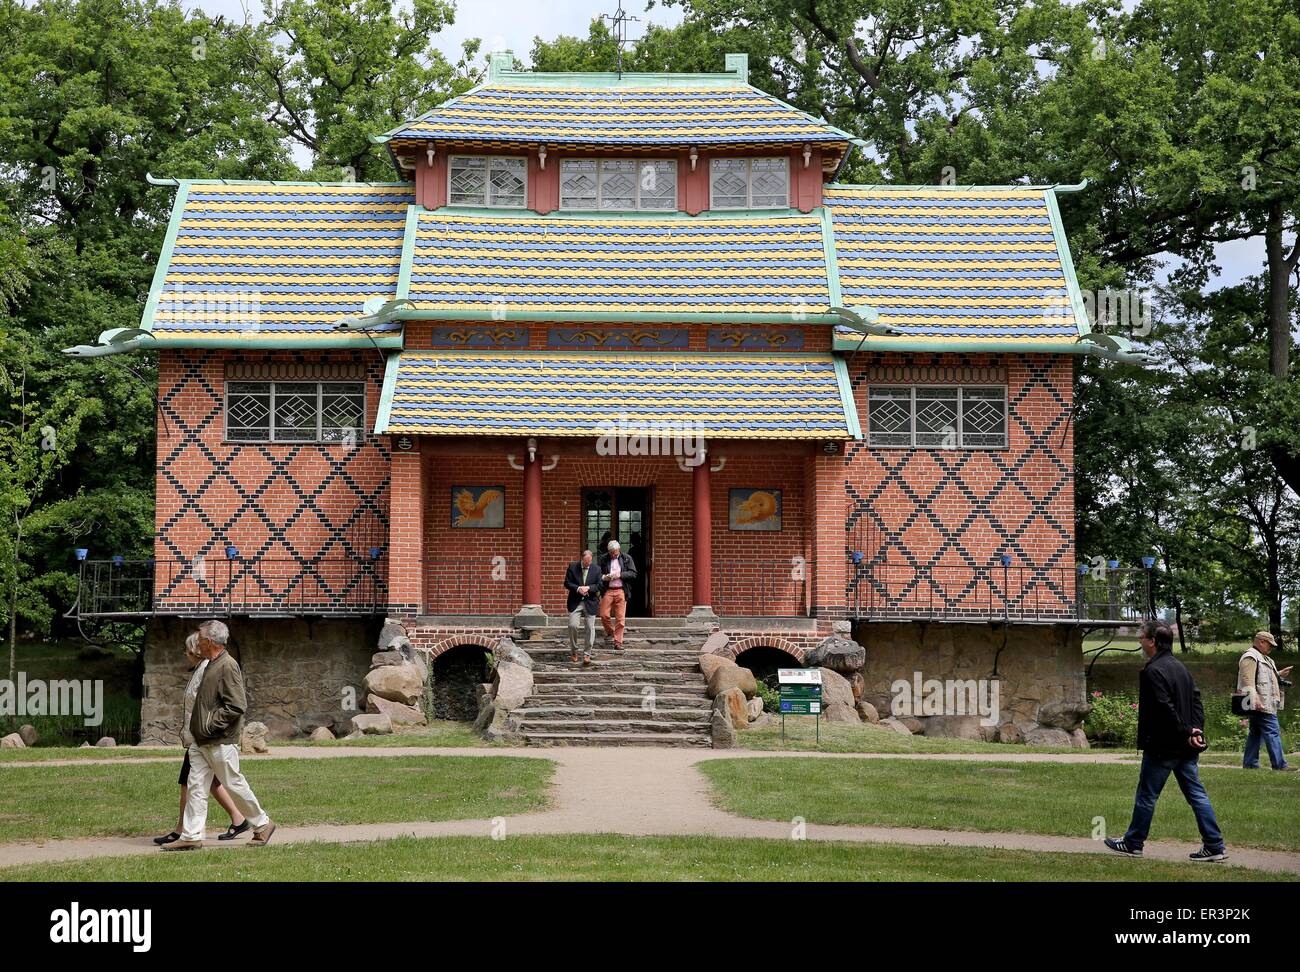 Visitors stand in front of the renovated Chinesisches Haus (lit. Chinese House) located inside the park of Oranienbaum Palace in Oranienbaum, Germany, 26 May 2015. The interior decoration has seen extensive restoration over the last two years. The painted paper wallpapers and the furniture were partially reconstructed. The teahouse built by Franz, Duke of Anhalt-Dessau, in 1795 has undergone extensive refurbishment since 2009 at a total cost of 1.3 million euros and is now open to the public. It is the centrepiece of the only currently still largely preserved English-Chinese garden from the 18 Stock Photo